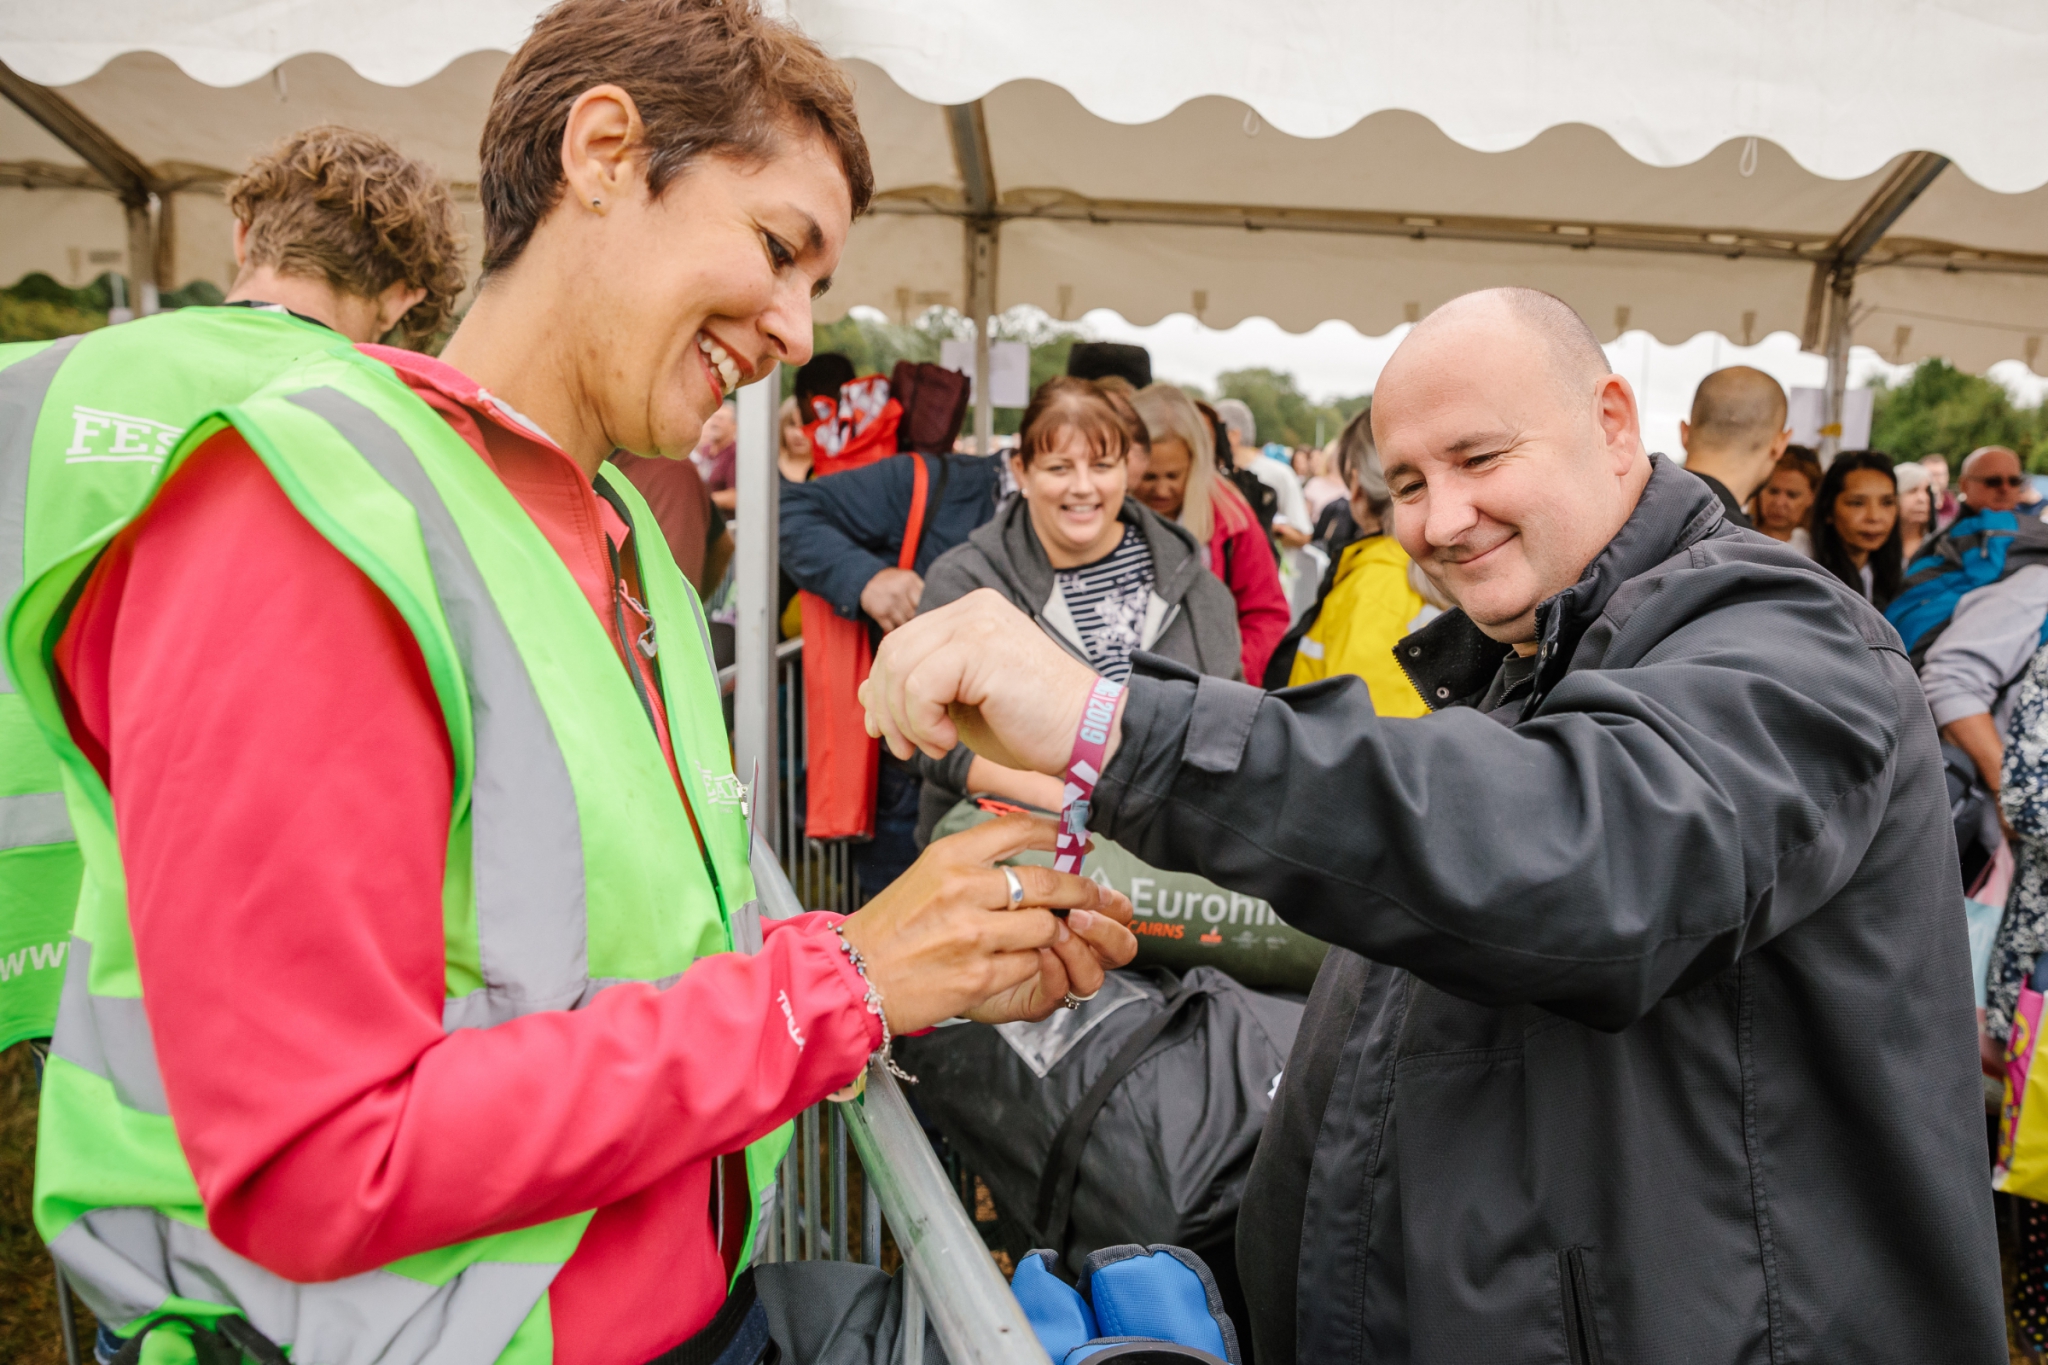 Experience Rewind North Festival as a Volunteer with Festaff